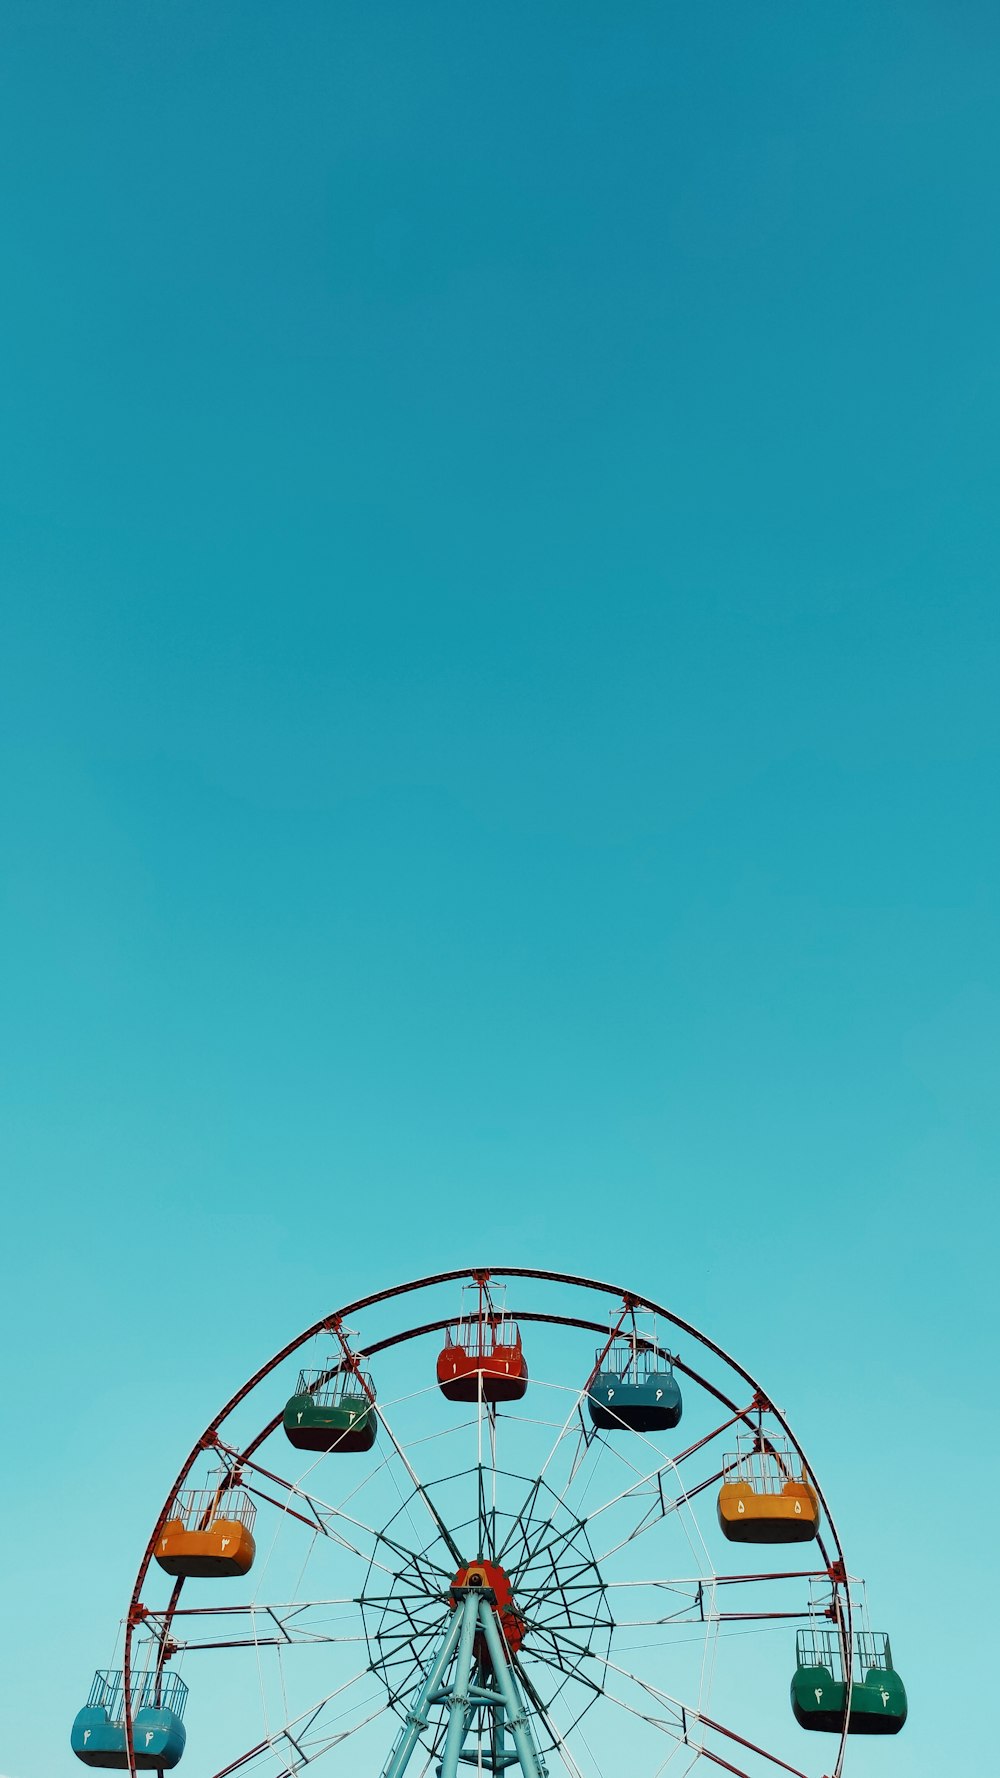 red and white ferris wheel under blue sky during daytime